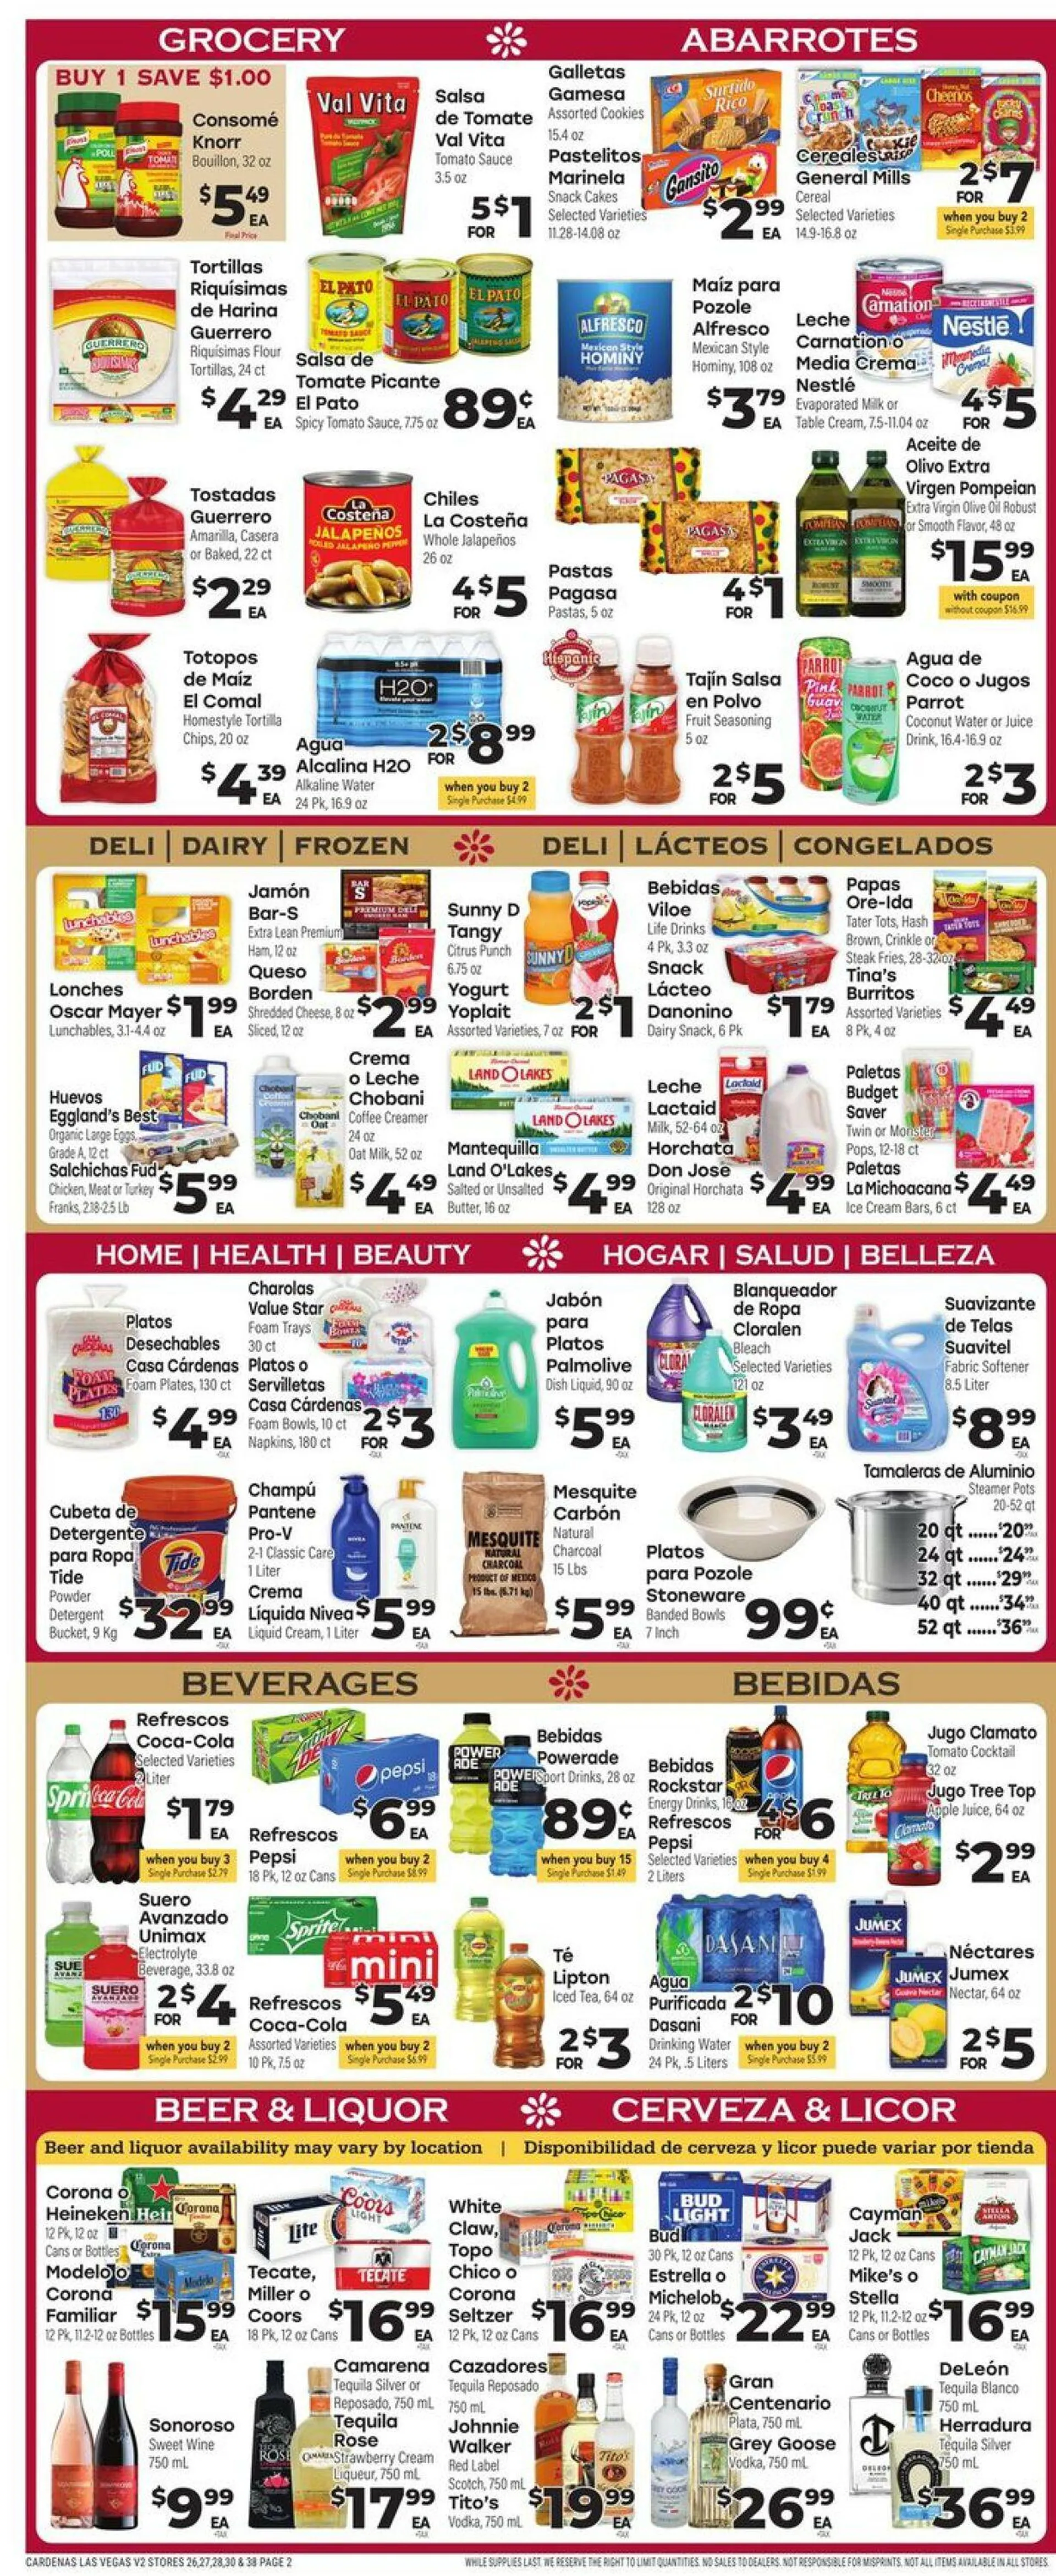 Cardenas Current weekly ad - 2